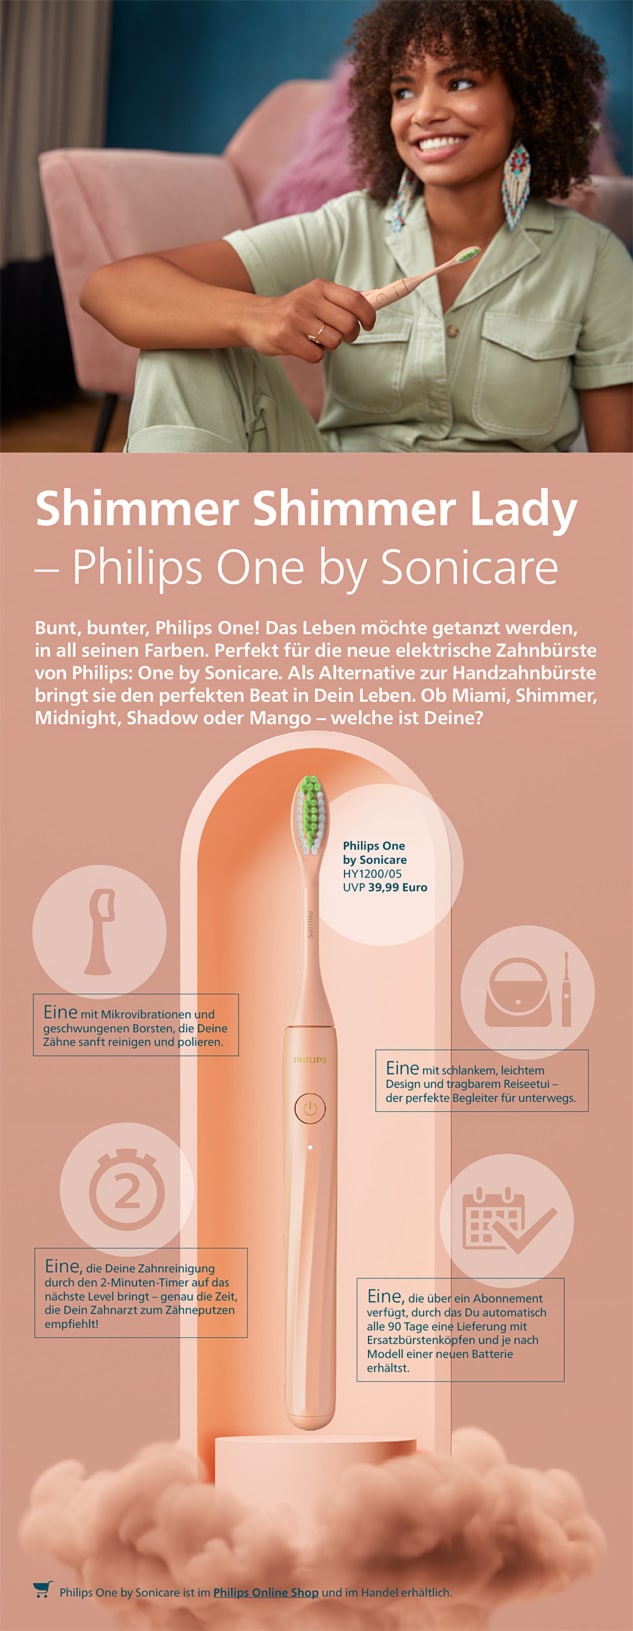 Philips Themensheet - Philips One by Sonicare - Shimmer